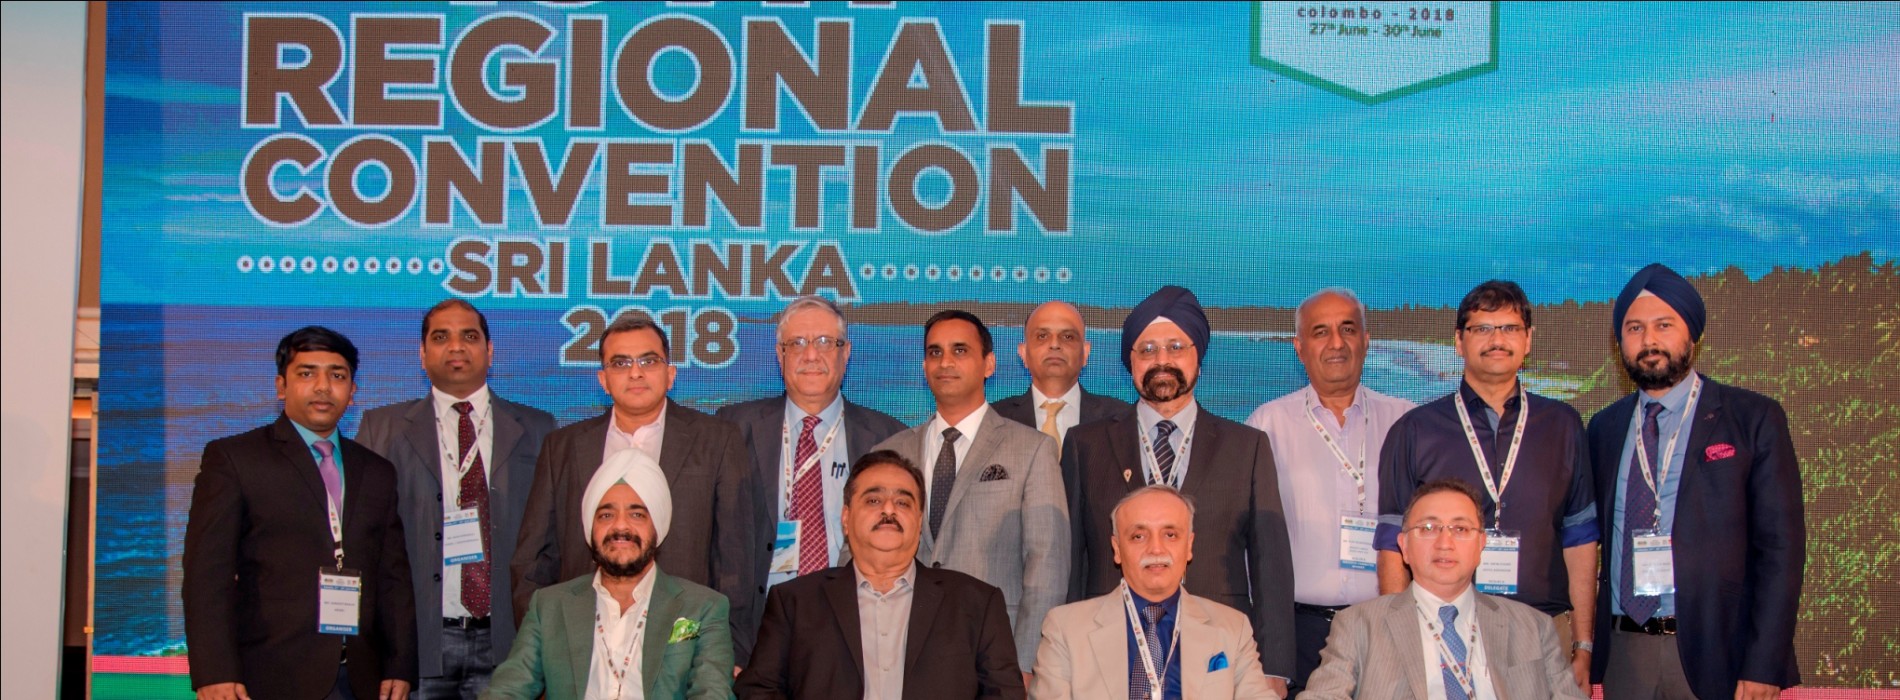 HRAWI’s 18th Regional Convention concludes in Sri Lanka